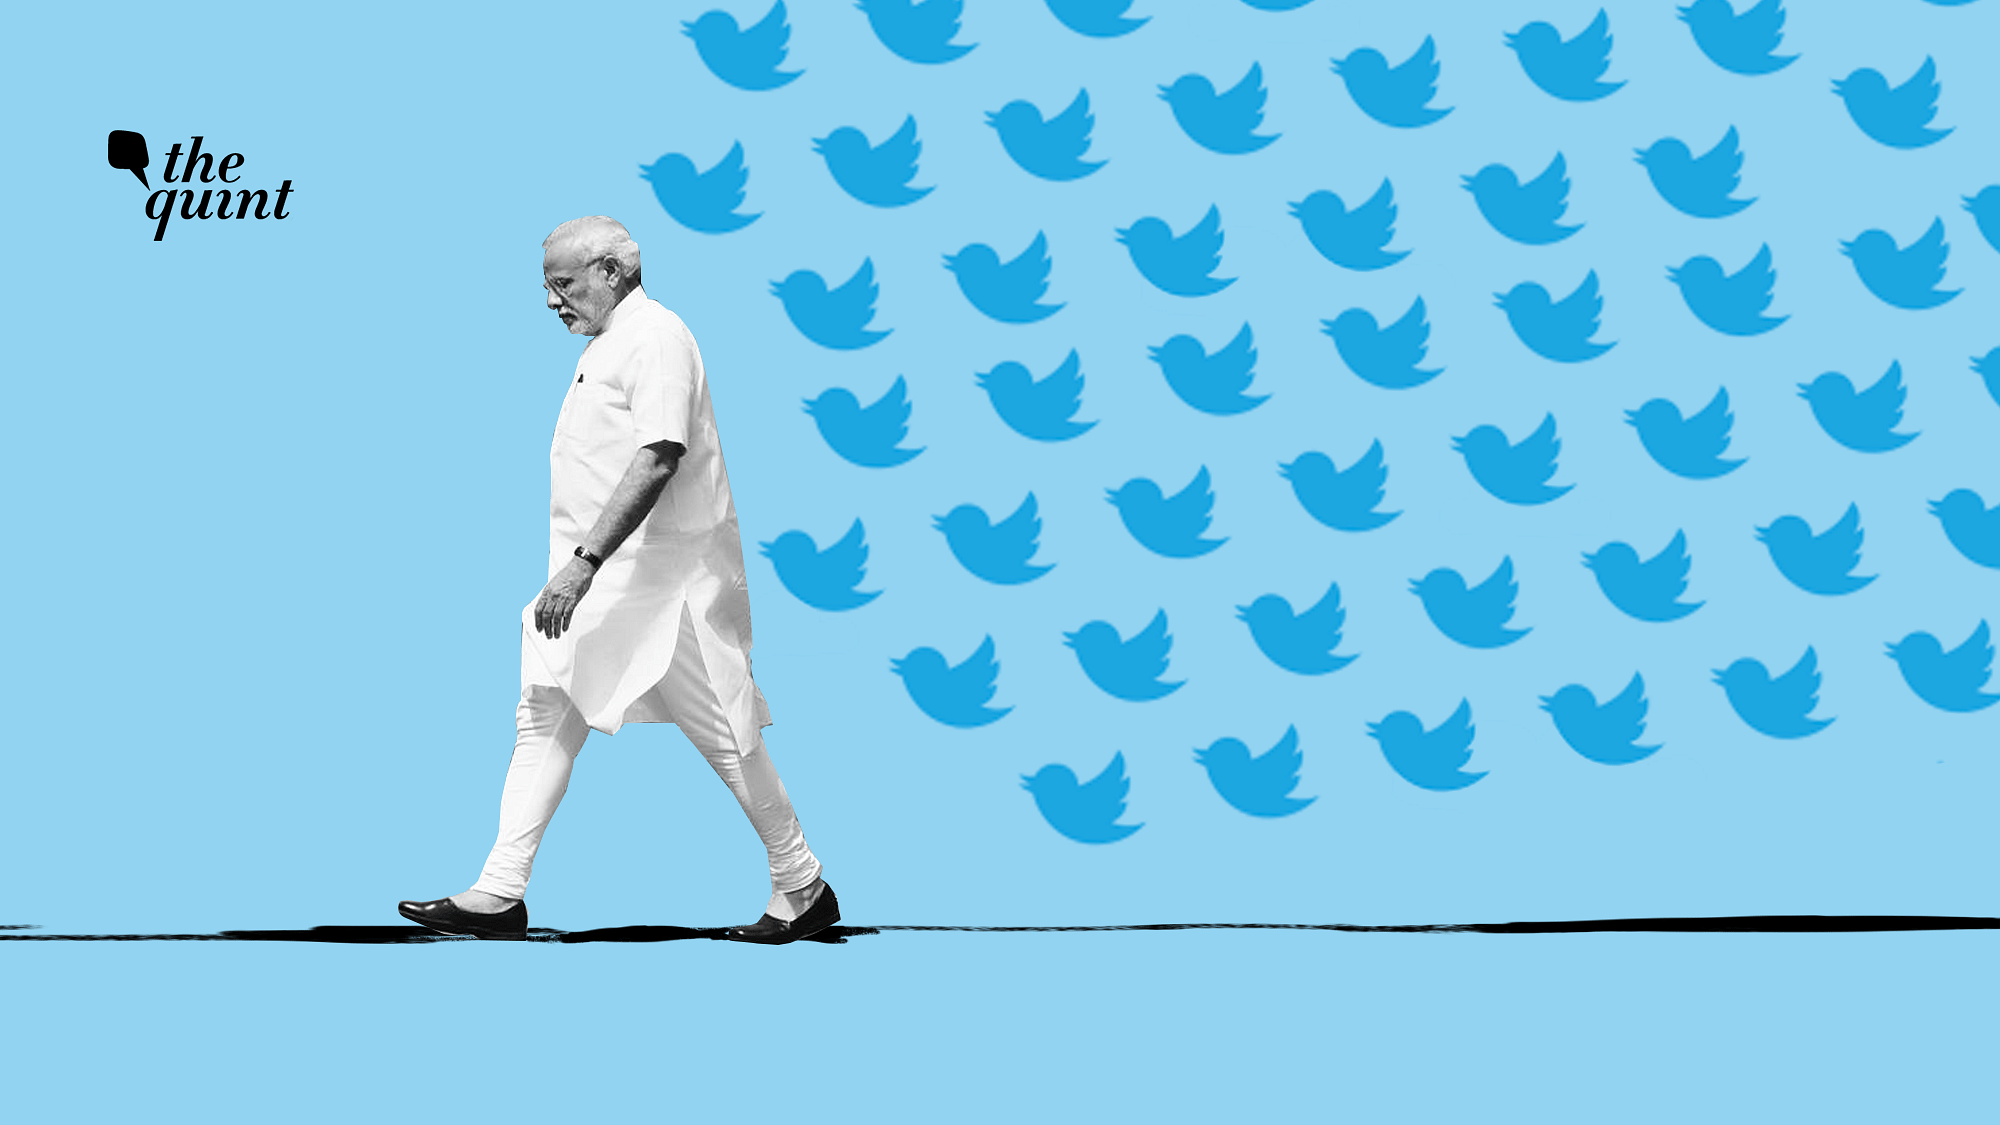 Prime Minister Narendra Modi on Monday took to Twitter, replying to users who have shared their experience in dealing with government officials and have taken steps to reduce the spread of the novel coronavirus cases in India.